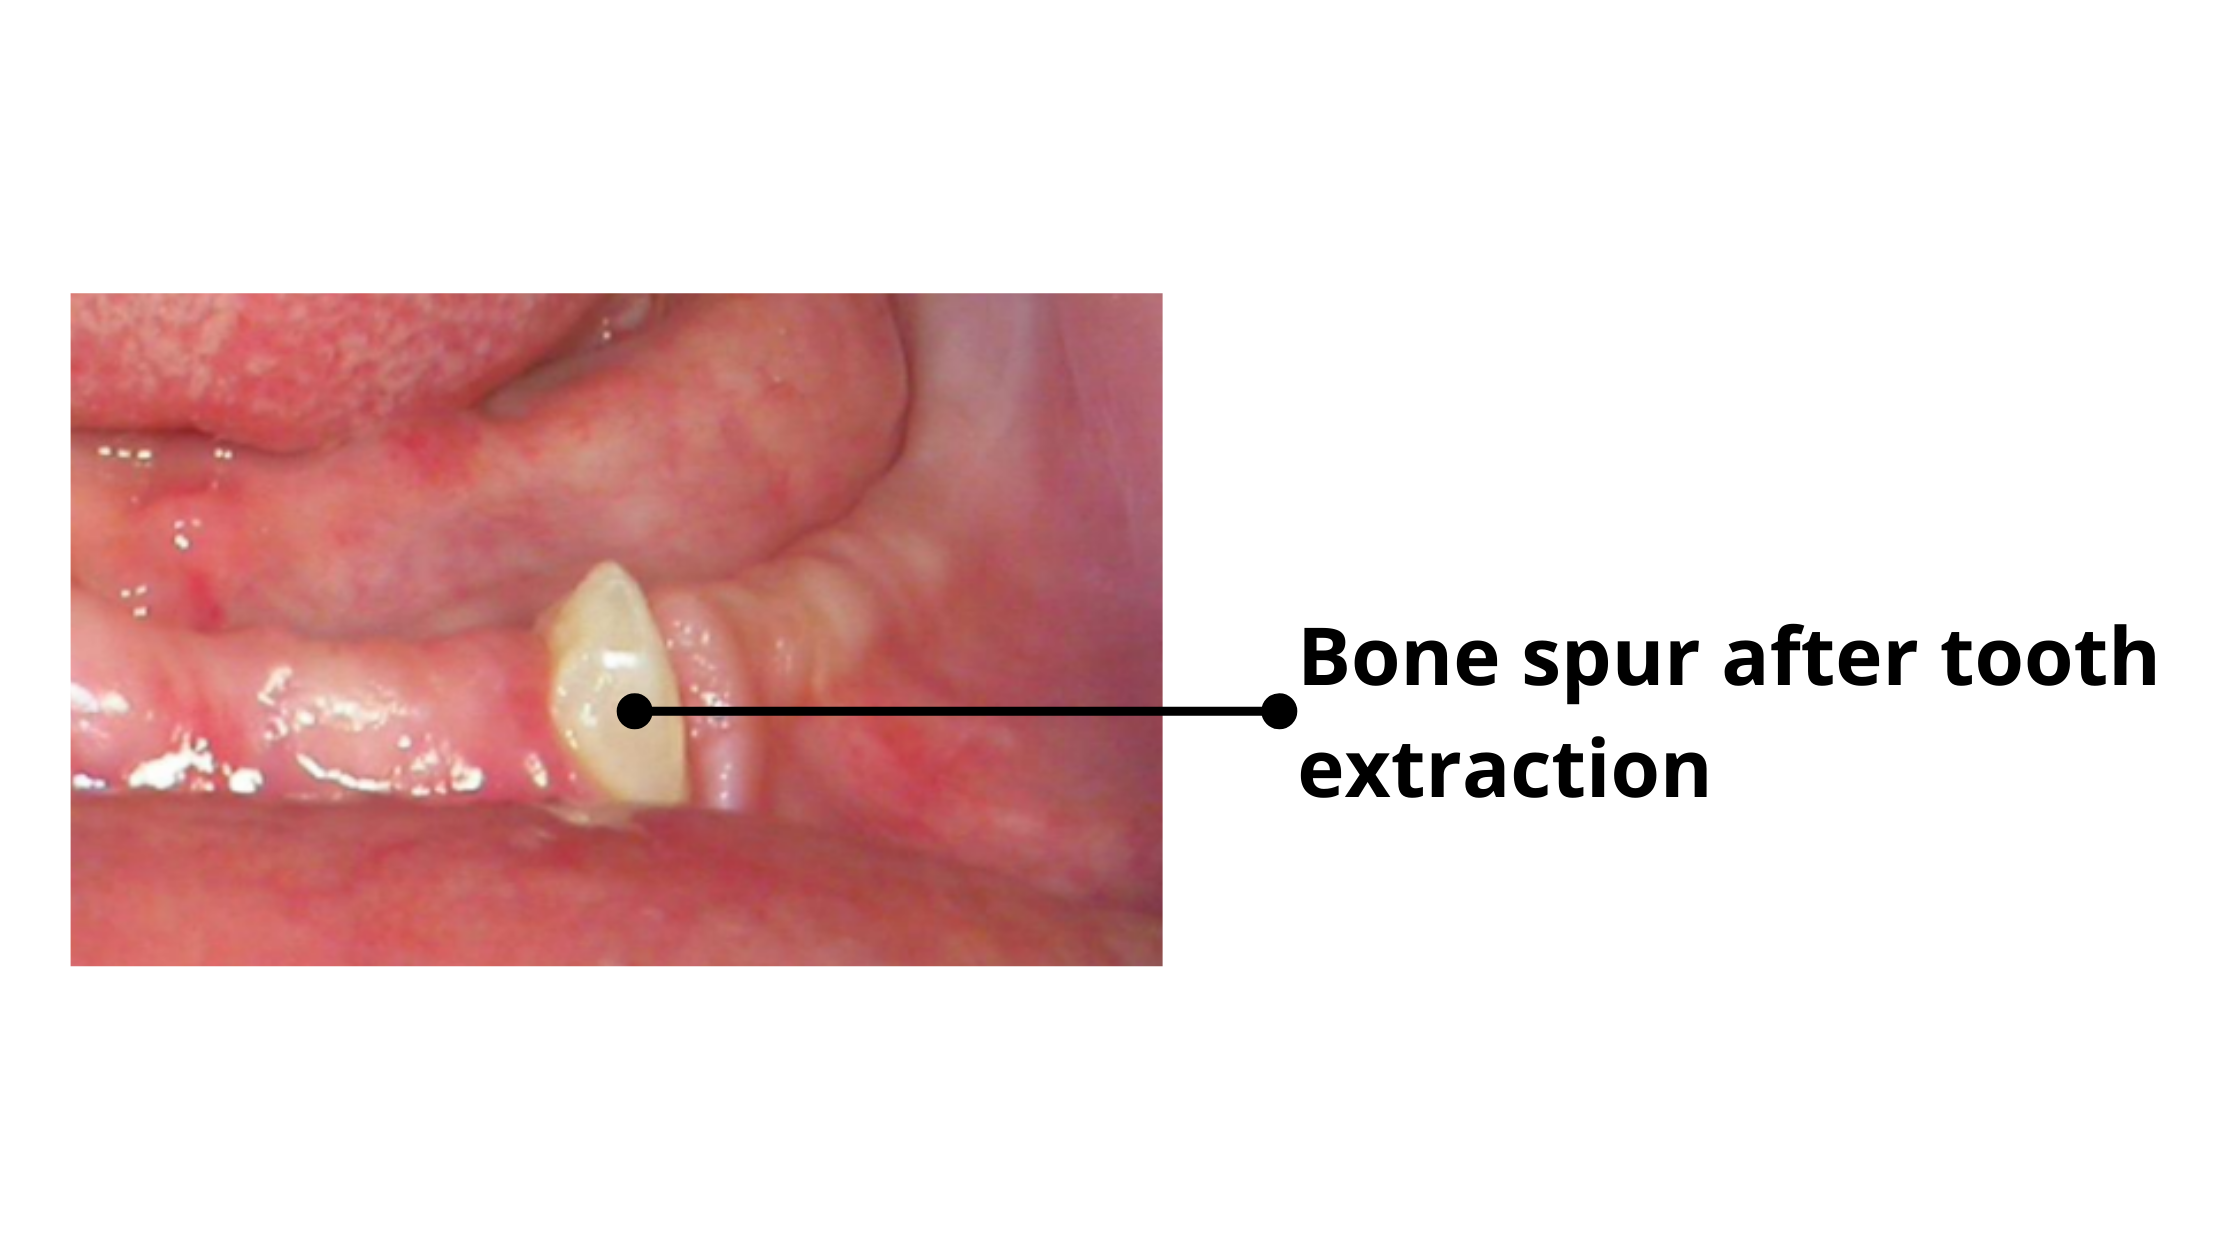 Bone spur after tooth extraction